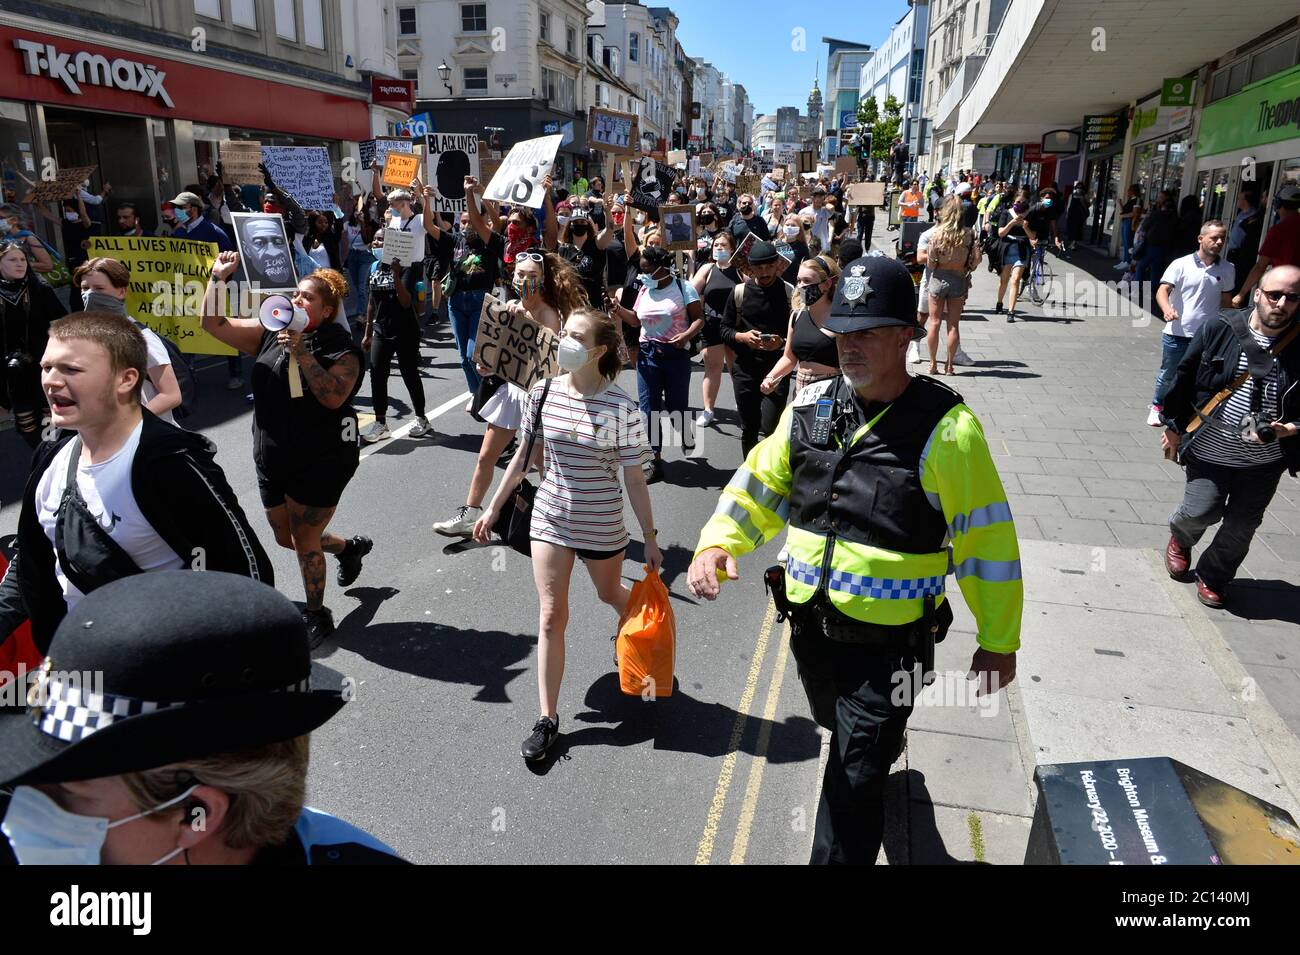 Black Lives Matter protest in Brighton 2020 which took place during the coronavirus lockdown. Picture terry Applin Stock Photo